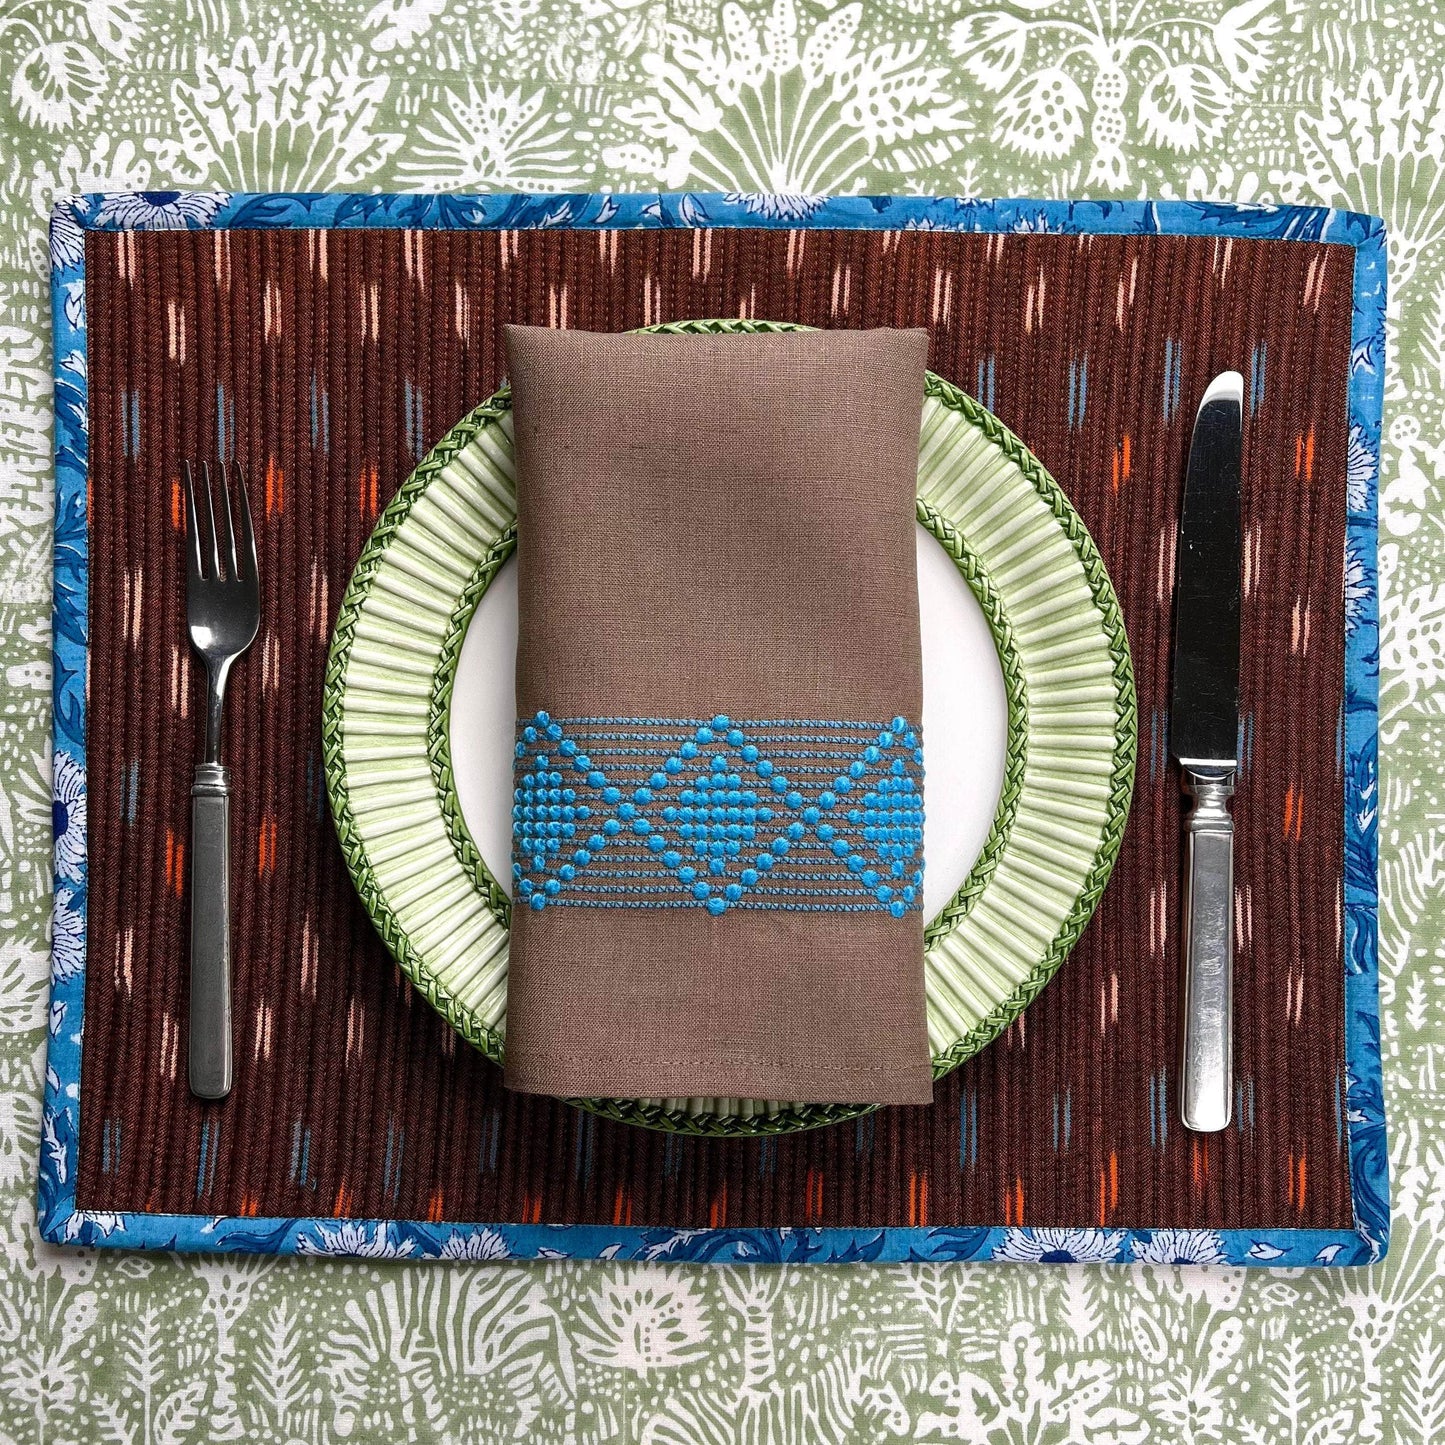 The Ikat Breakfast Placemat - Blue & Brown